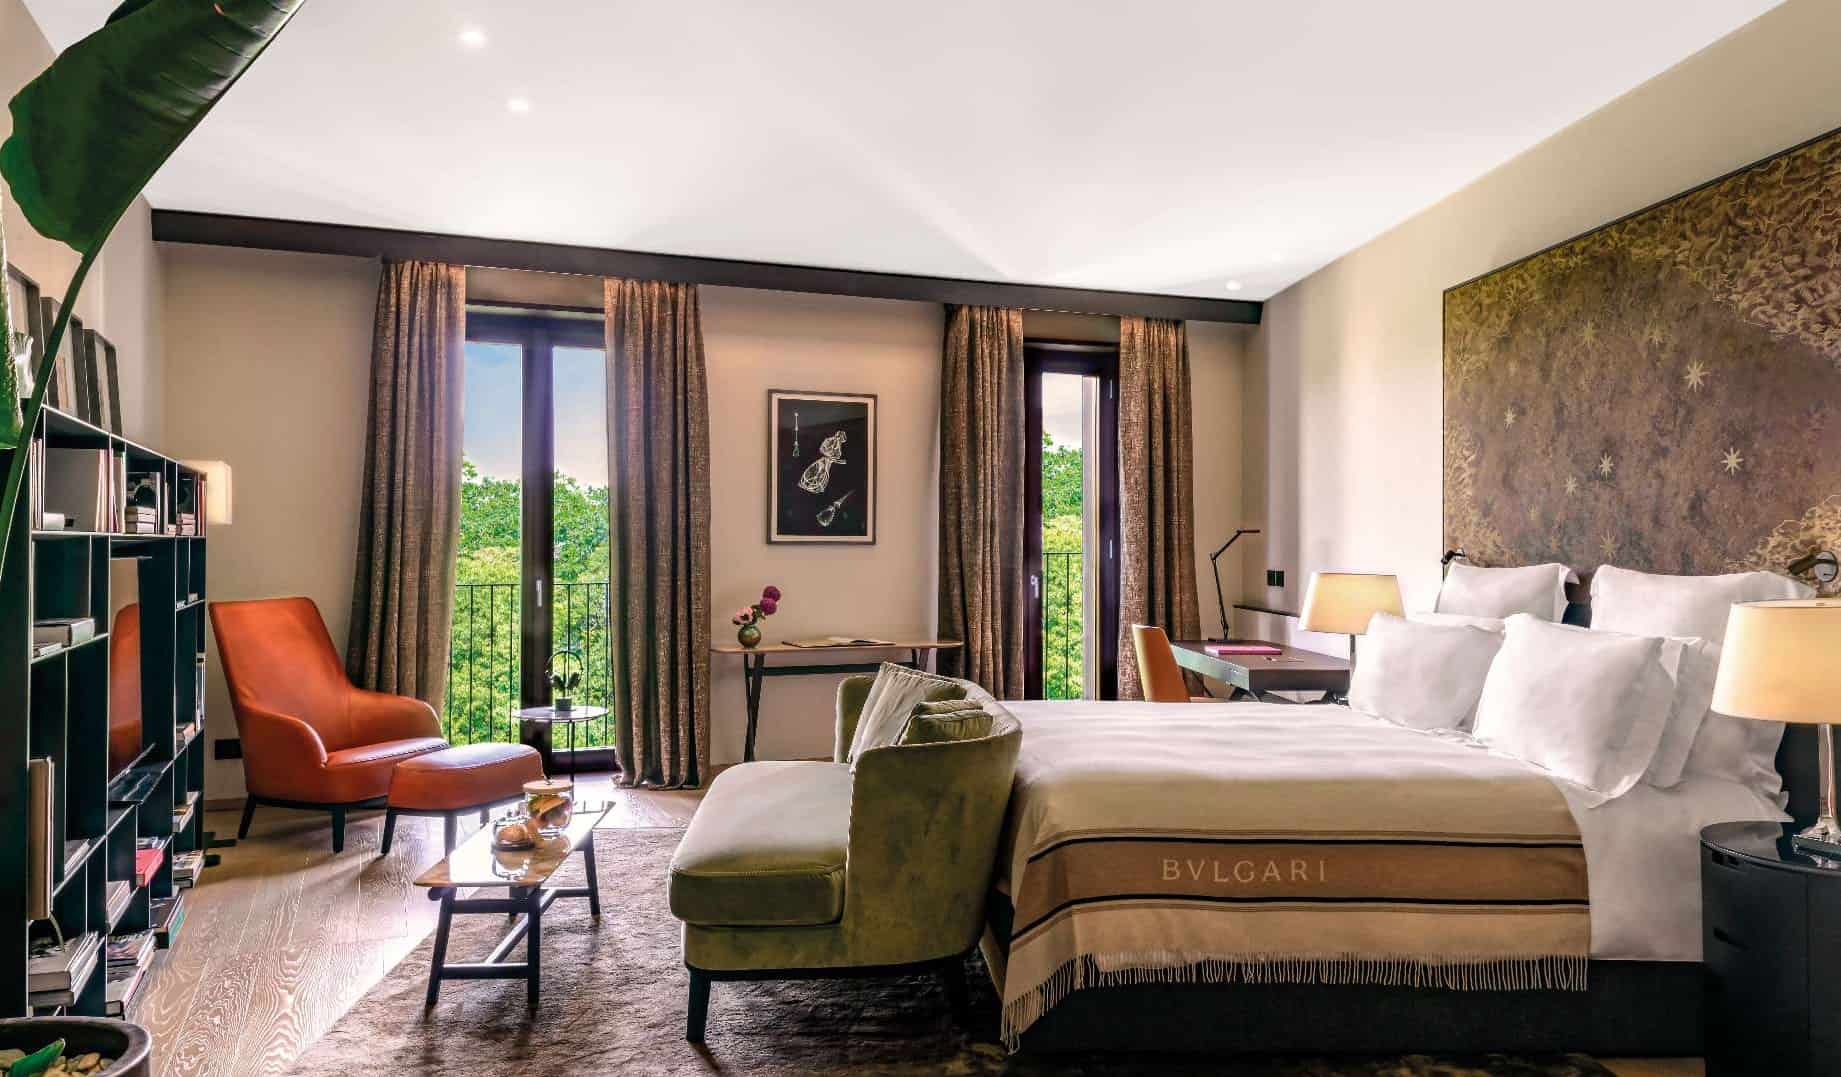 A luxurious hotel room with a velour sofa, leather armchair, bookcases, and king-sized bed covered in blankets at Bulgari Hotel Milano, a five-star hotel in Milan, Italy